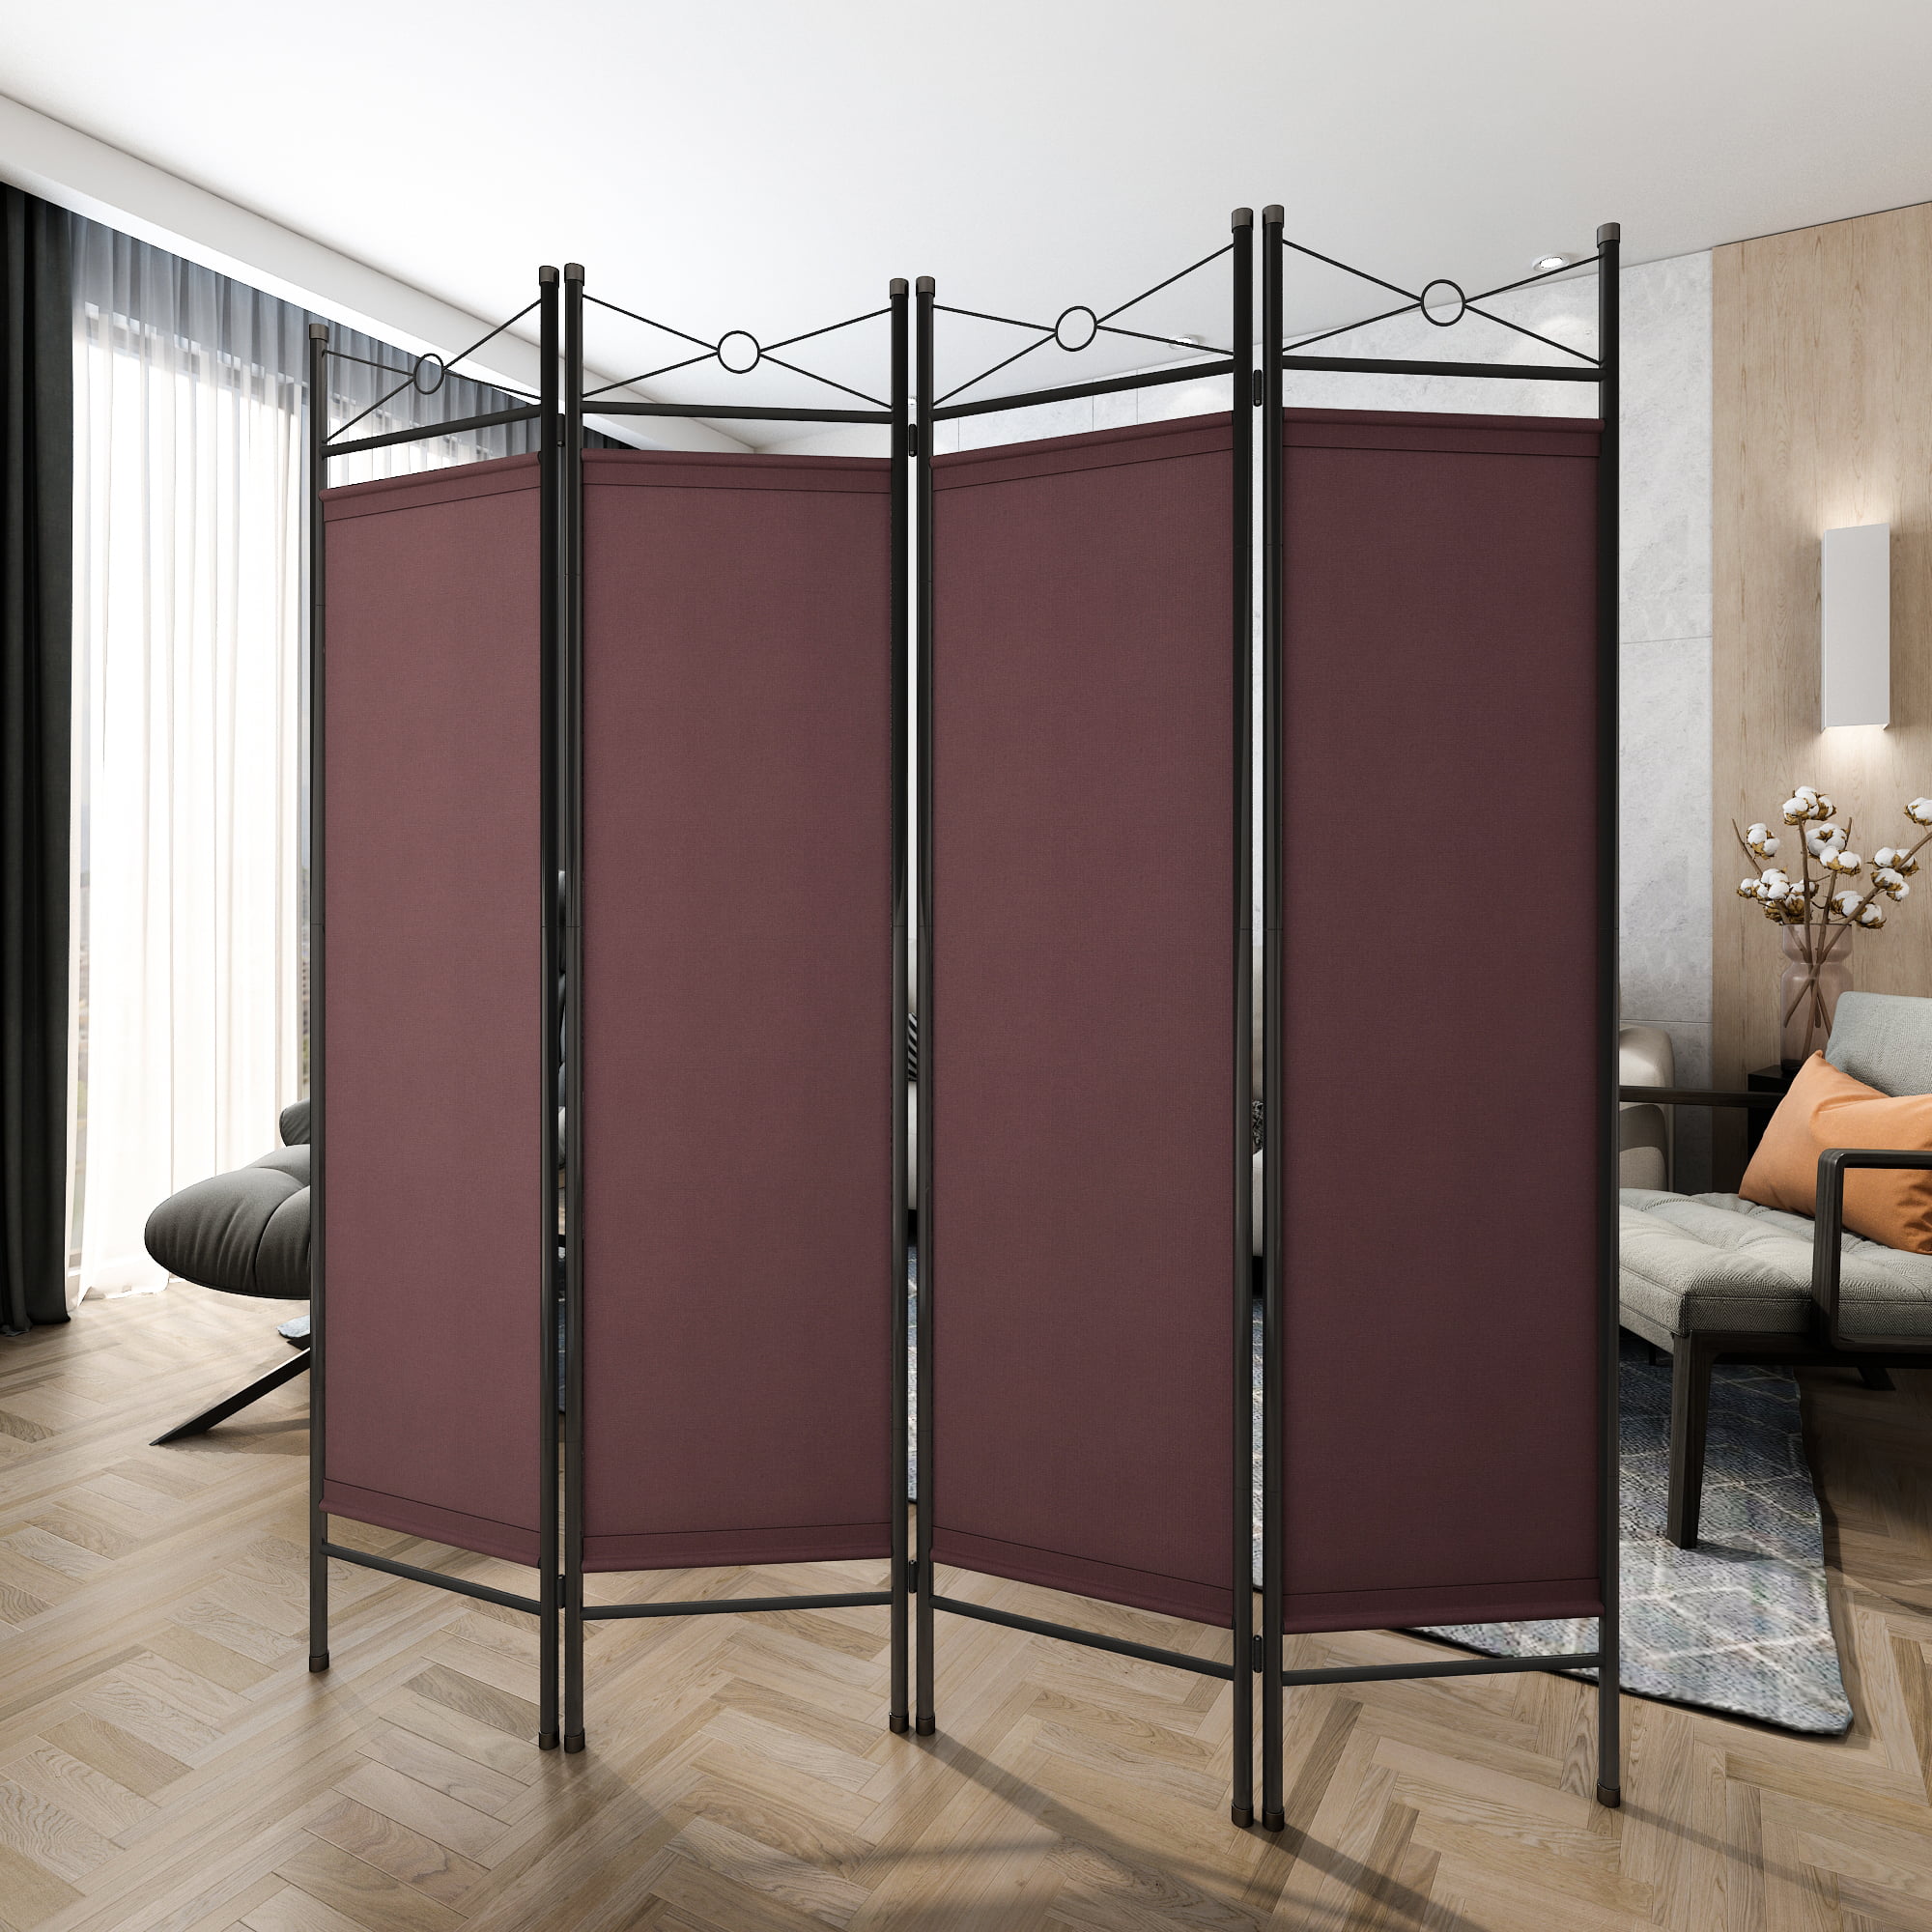 Details about   Decorative Folding Screen room divider partition Spanish wall privacy b-A-0157-z-c show original title 